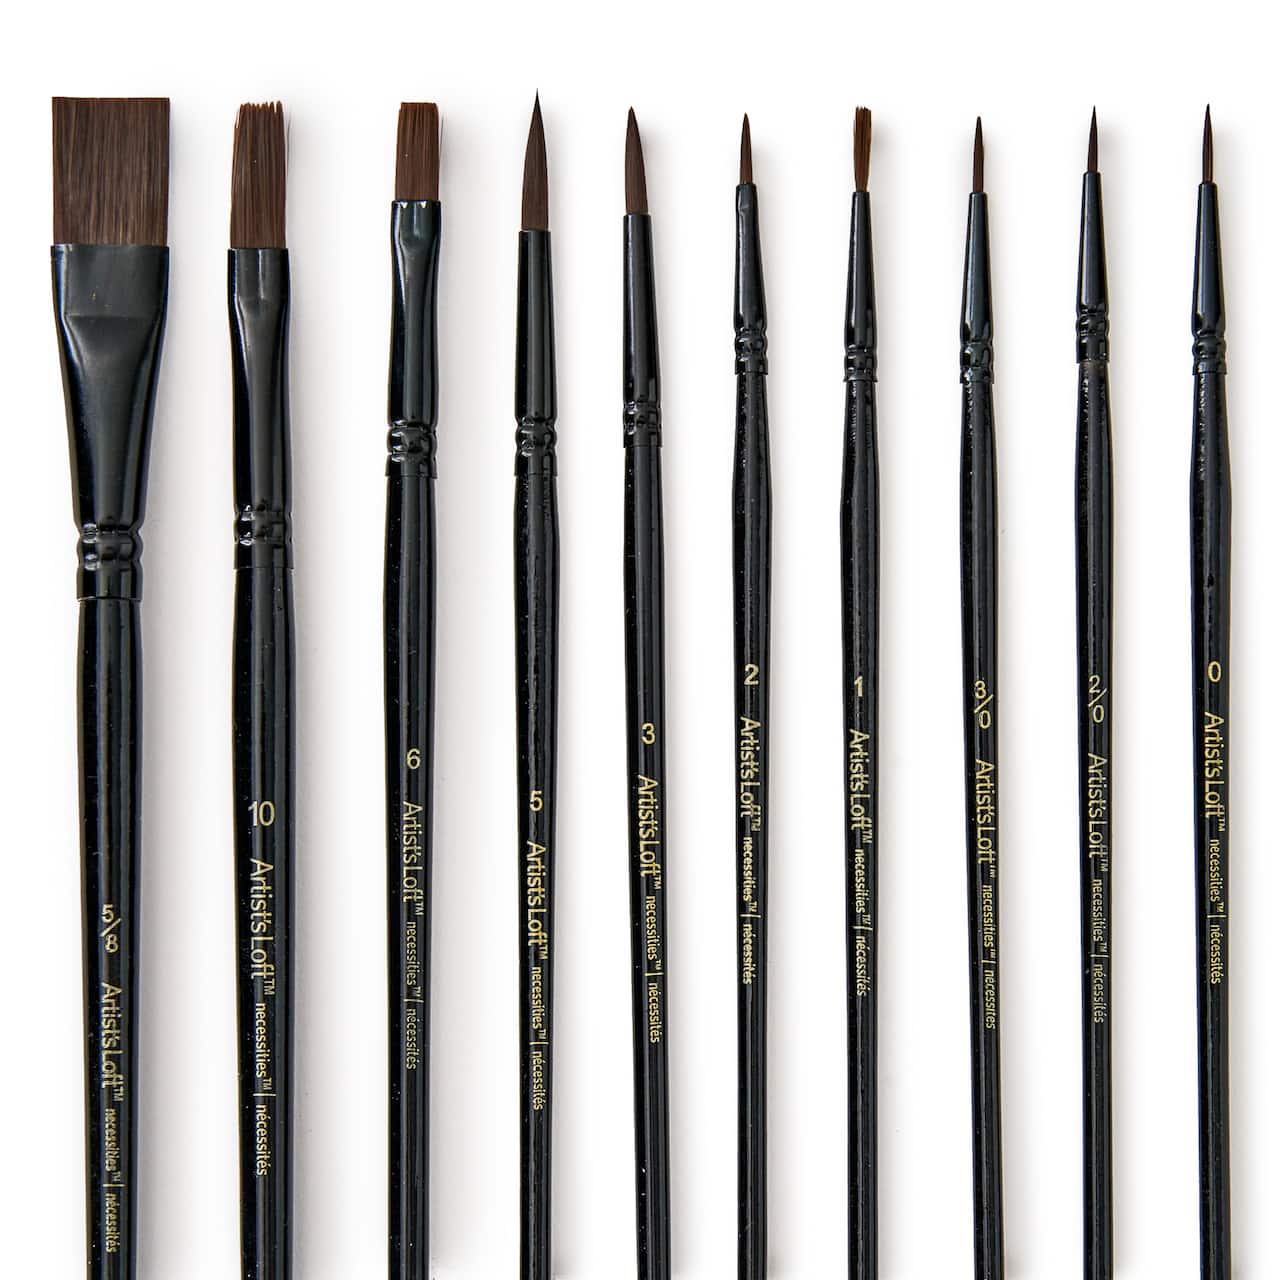 Necessities&#x2122; Brown Synthetic Watercolor 10 Piece Brush Set by Artist&#x27;s Loft&#xAE;